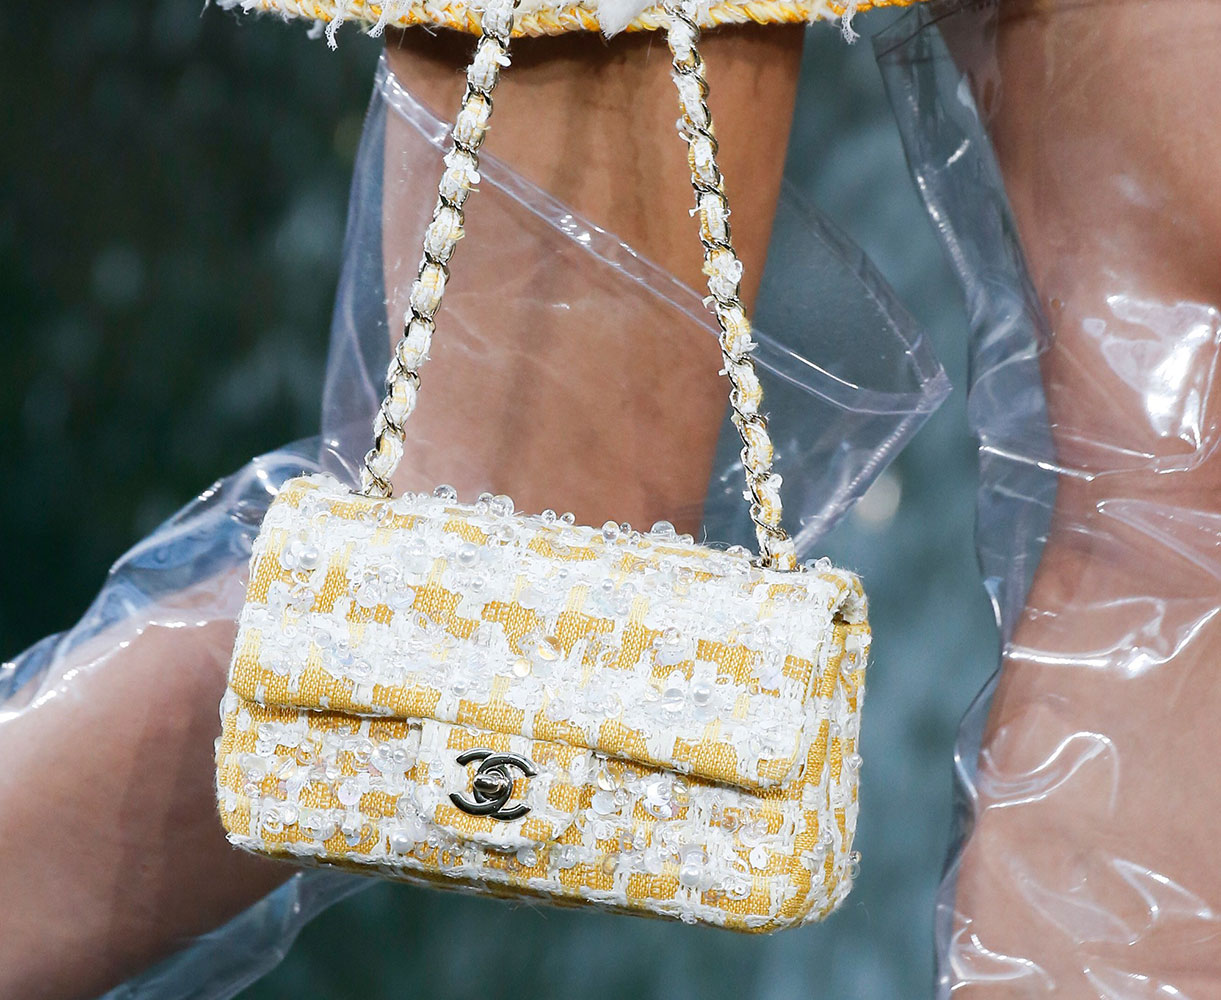 59 Brand New Chanel Bags, Straight From the Brand's Mermaid Blue Spring  2018 Runway in Paris - PurseBlog